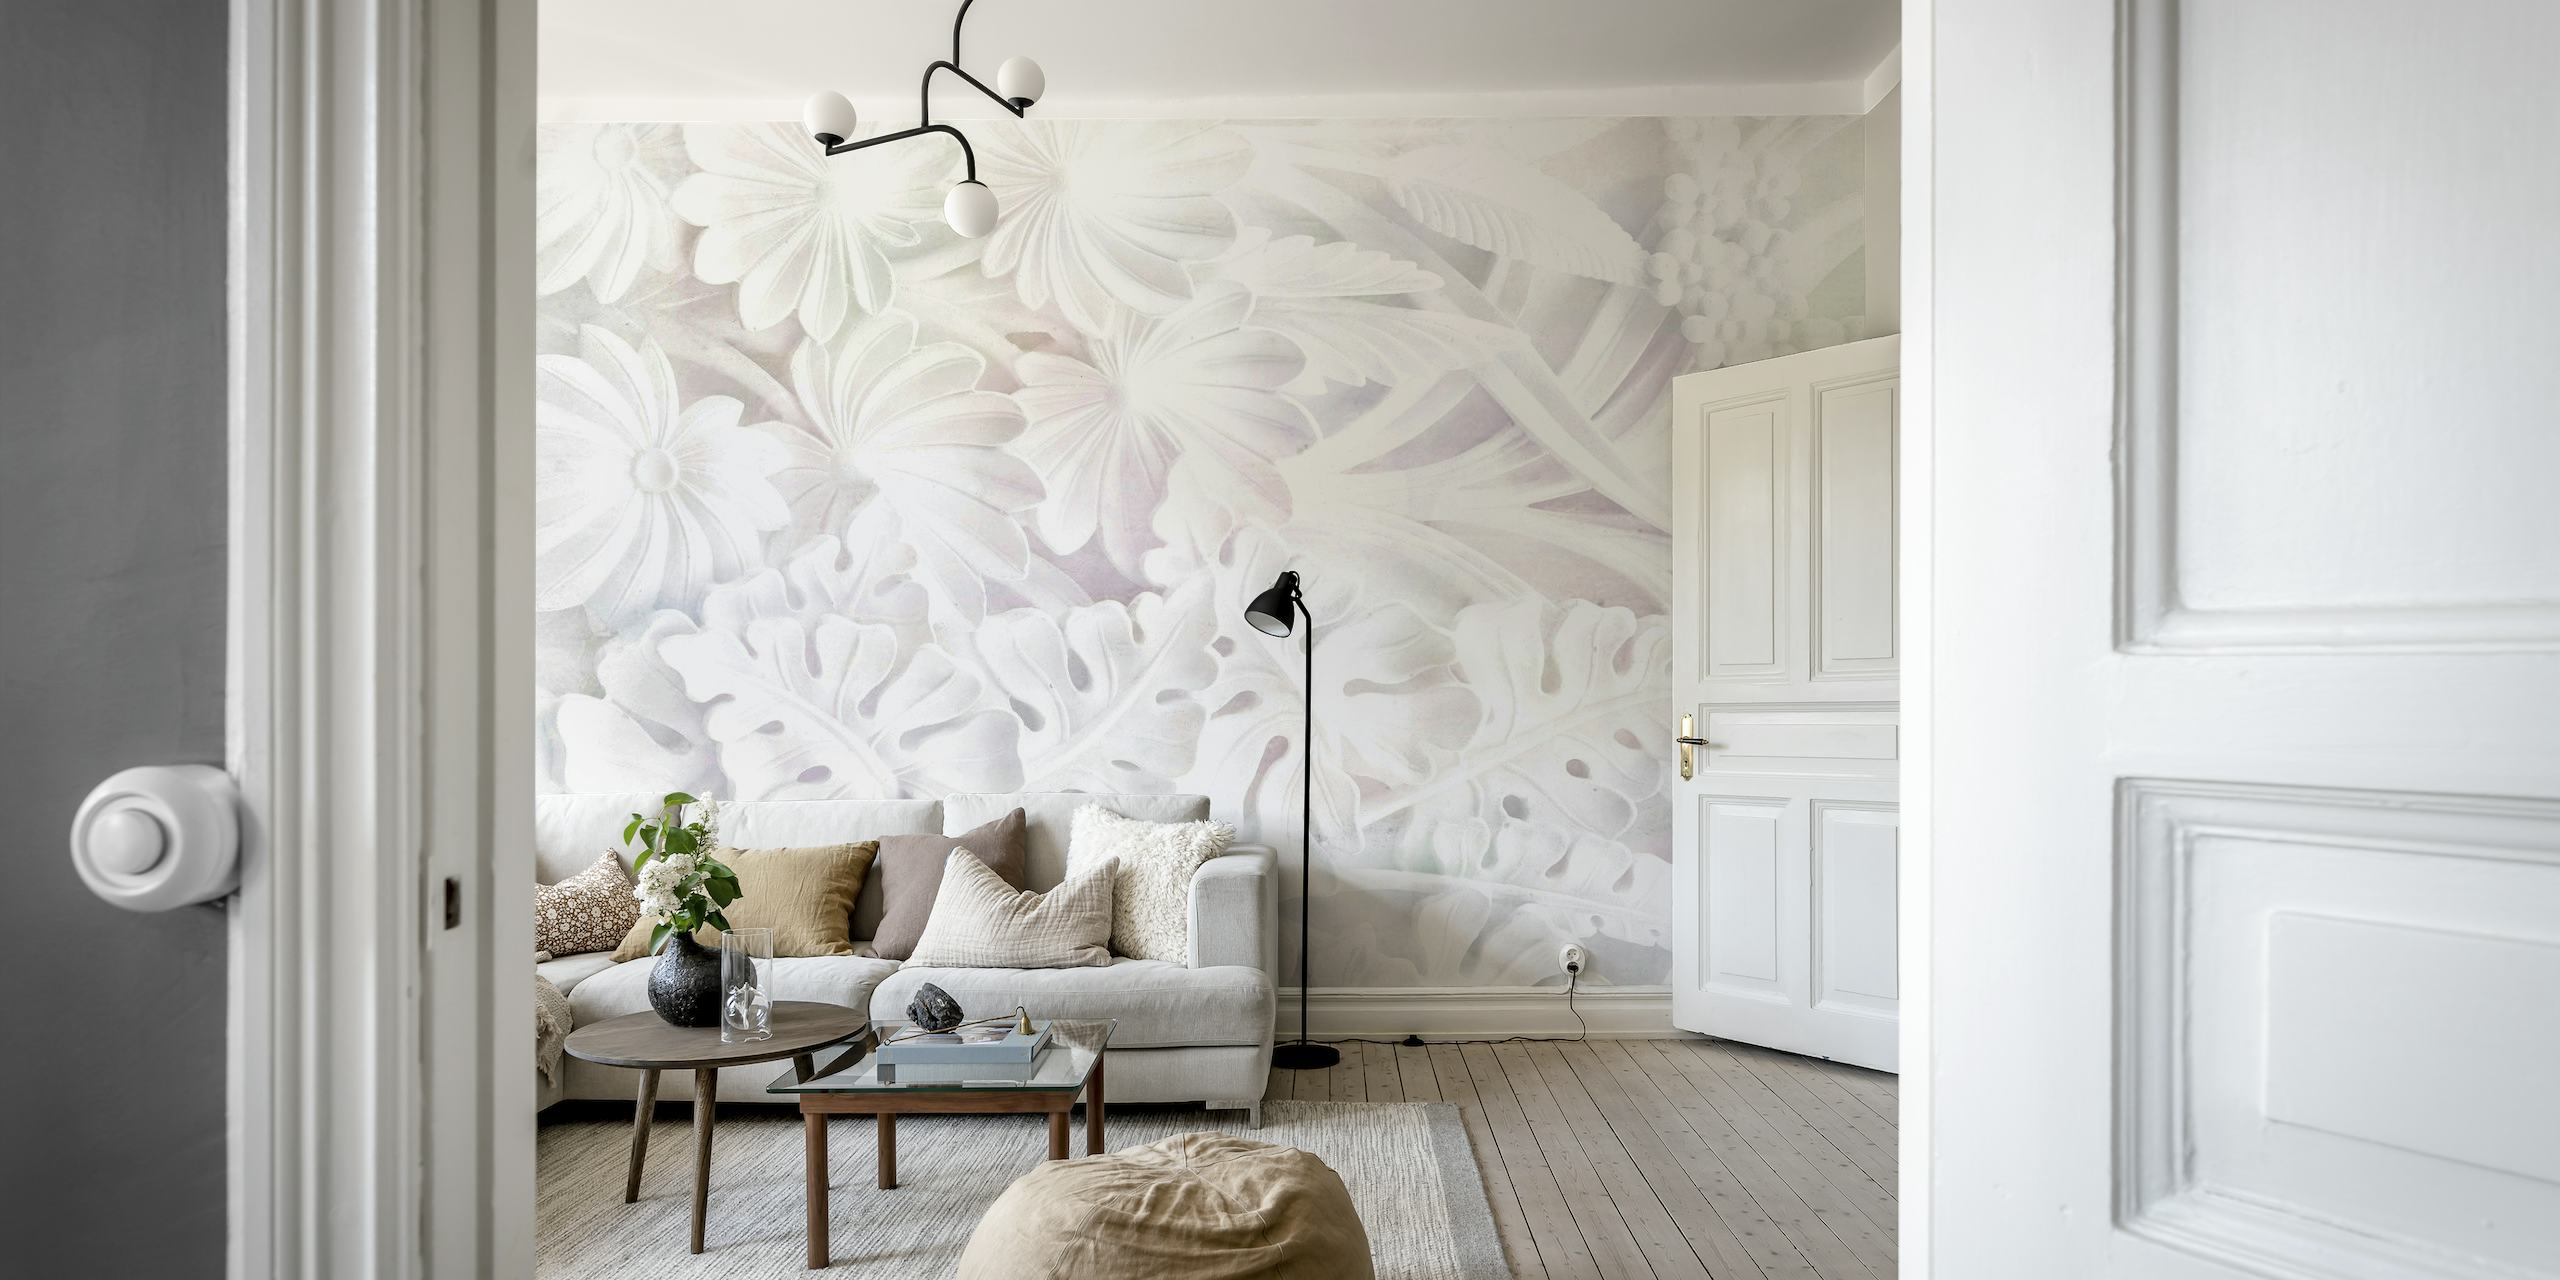 Ethereal soft grey and white stone-like floral pattern wall mural